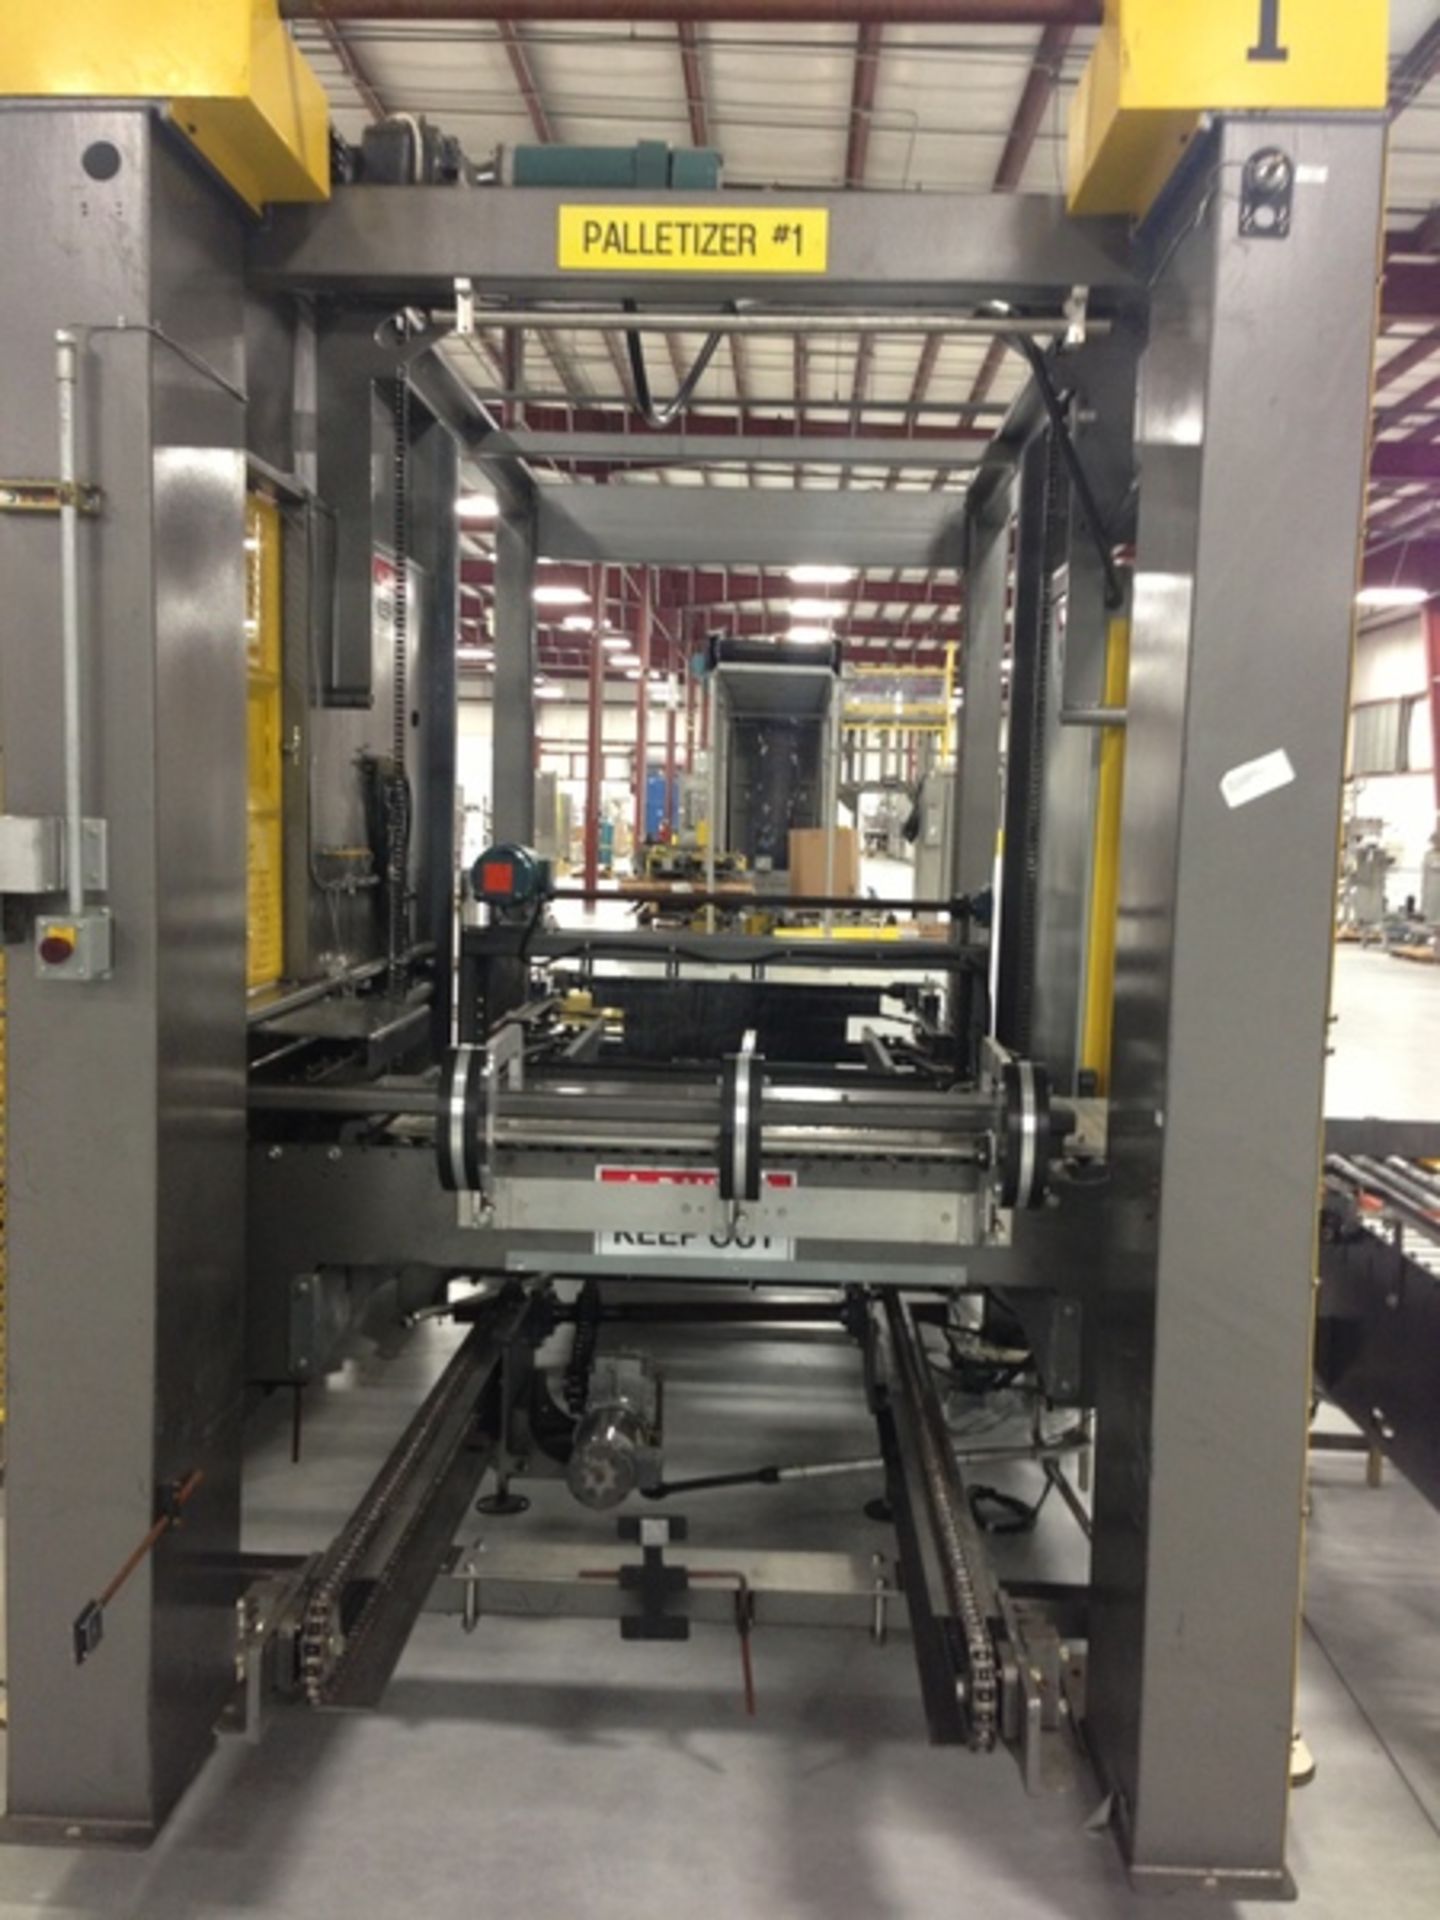 2004 Columbia FL100 Low Level Palletizer - Image 2 of 3